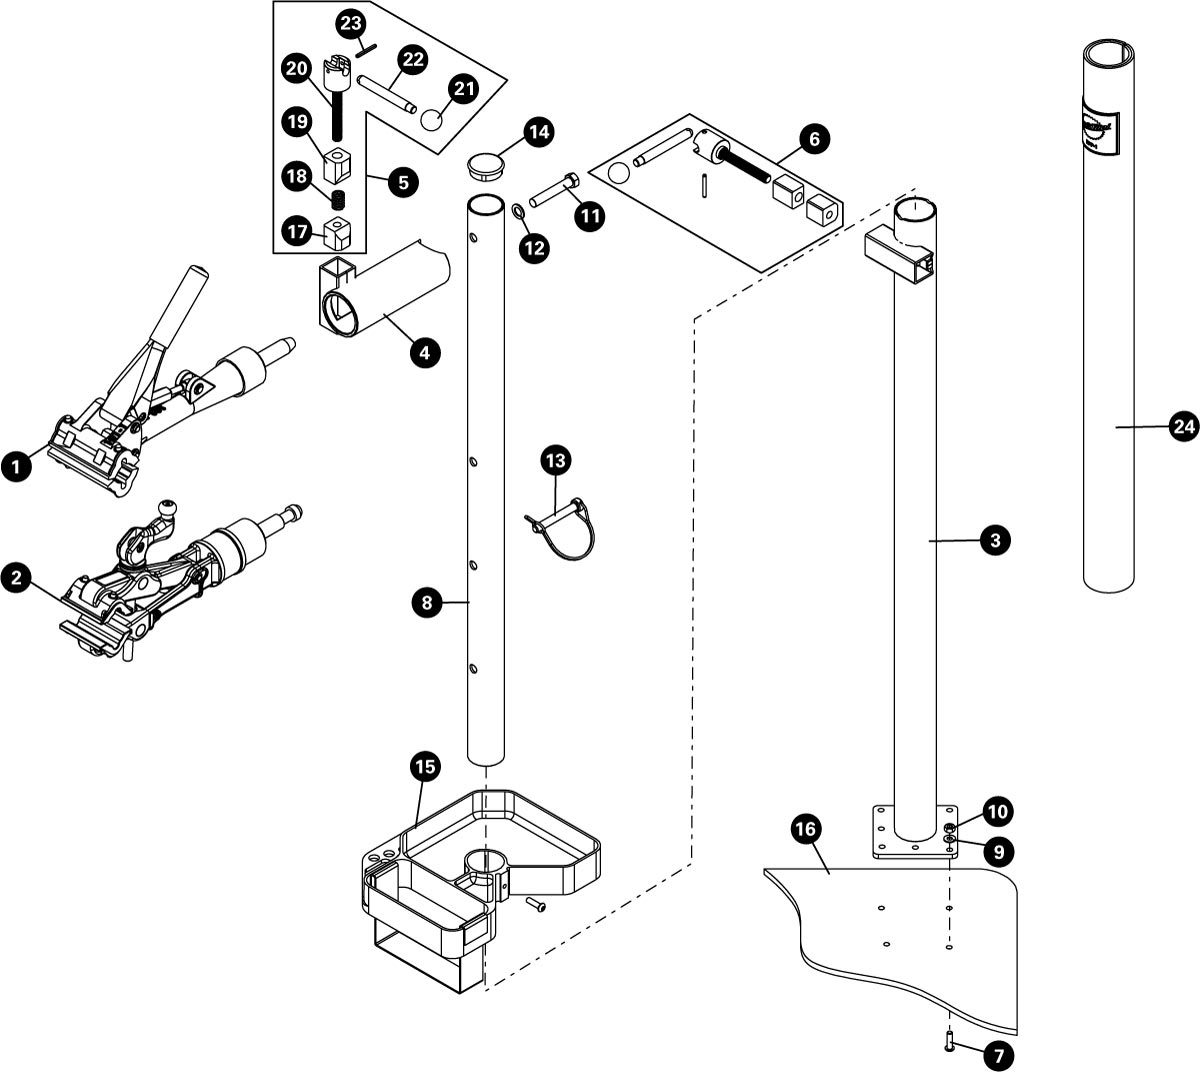 Parts diagram for PRS-3.3-1 Deluxe Single Arm Repair Stand, click to enlarge